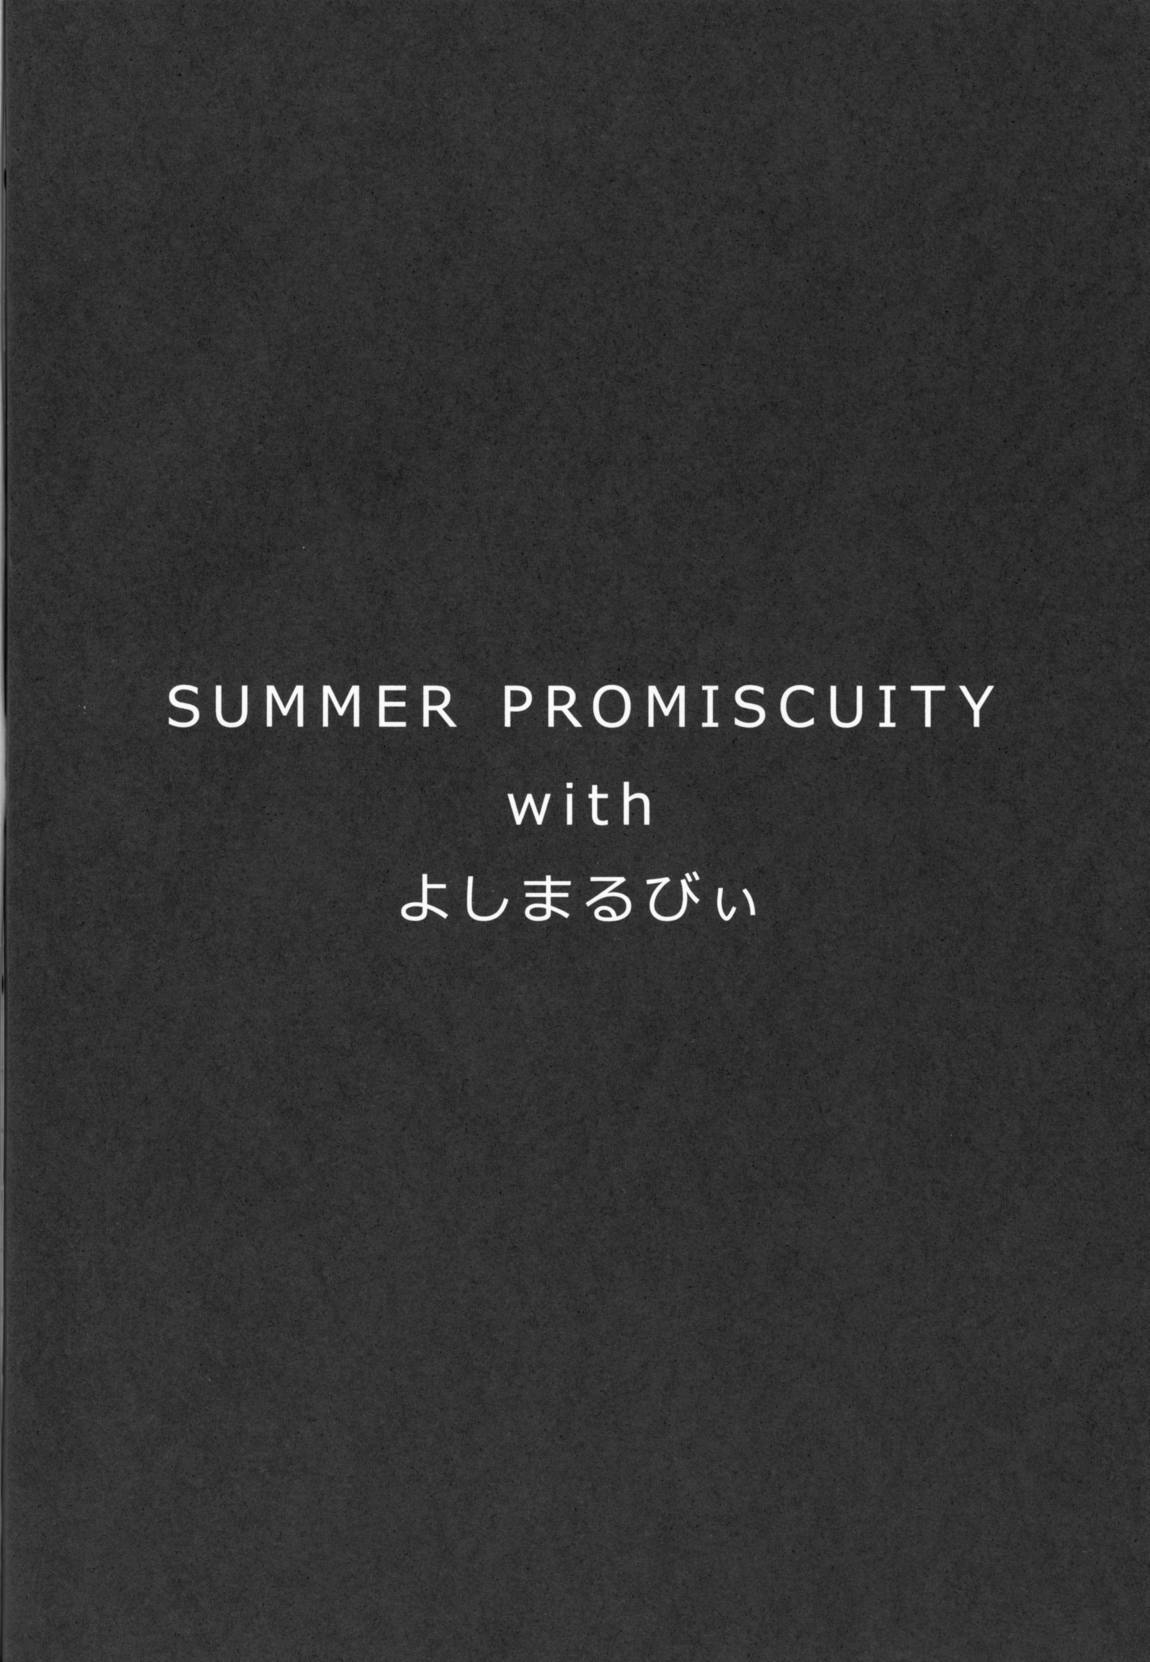 SUMMER PROMISCUITY withよしまるびぃ 3ページ